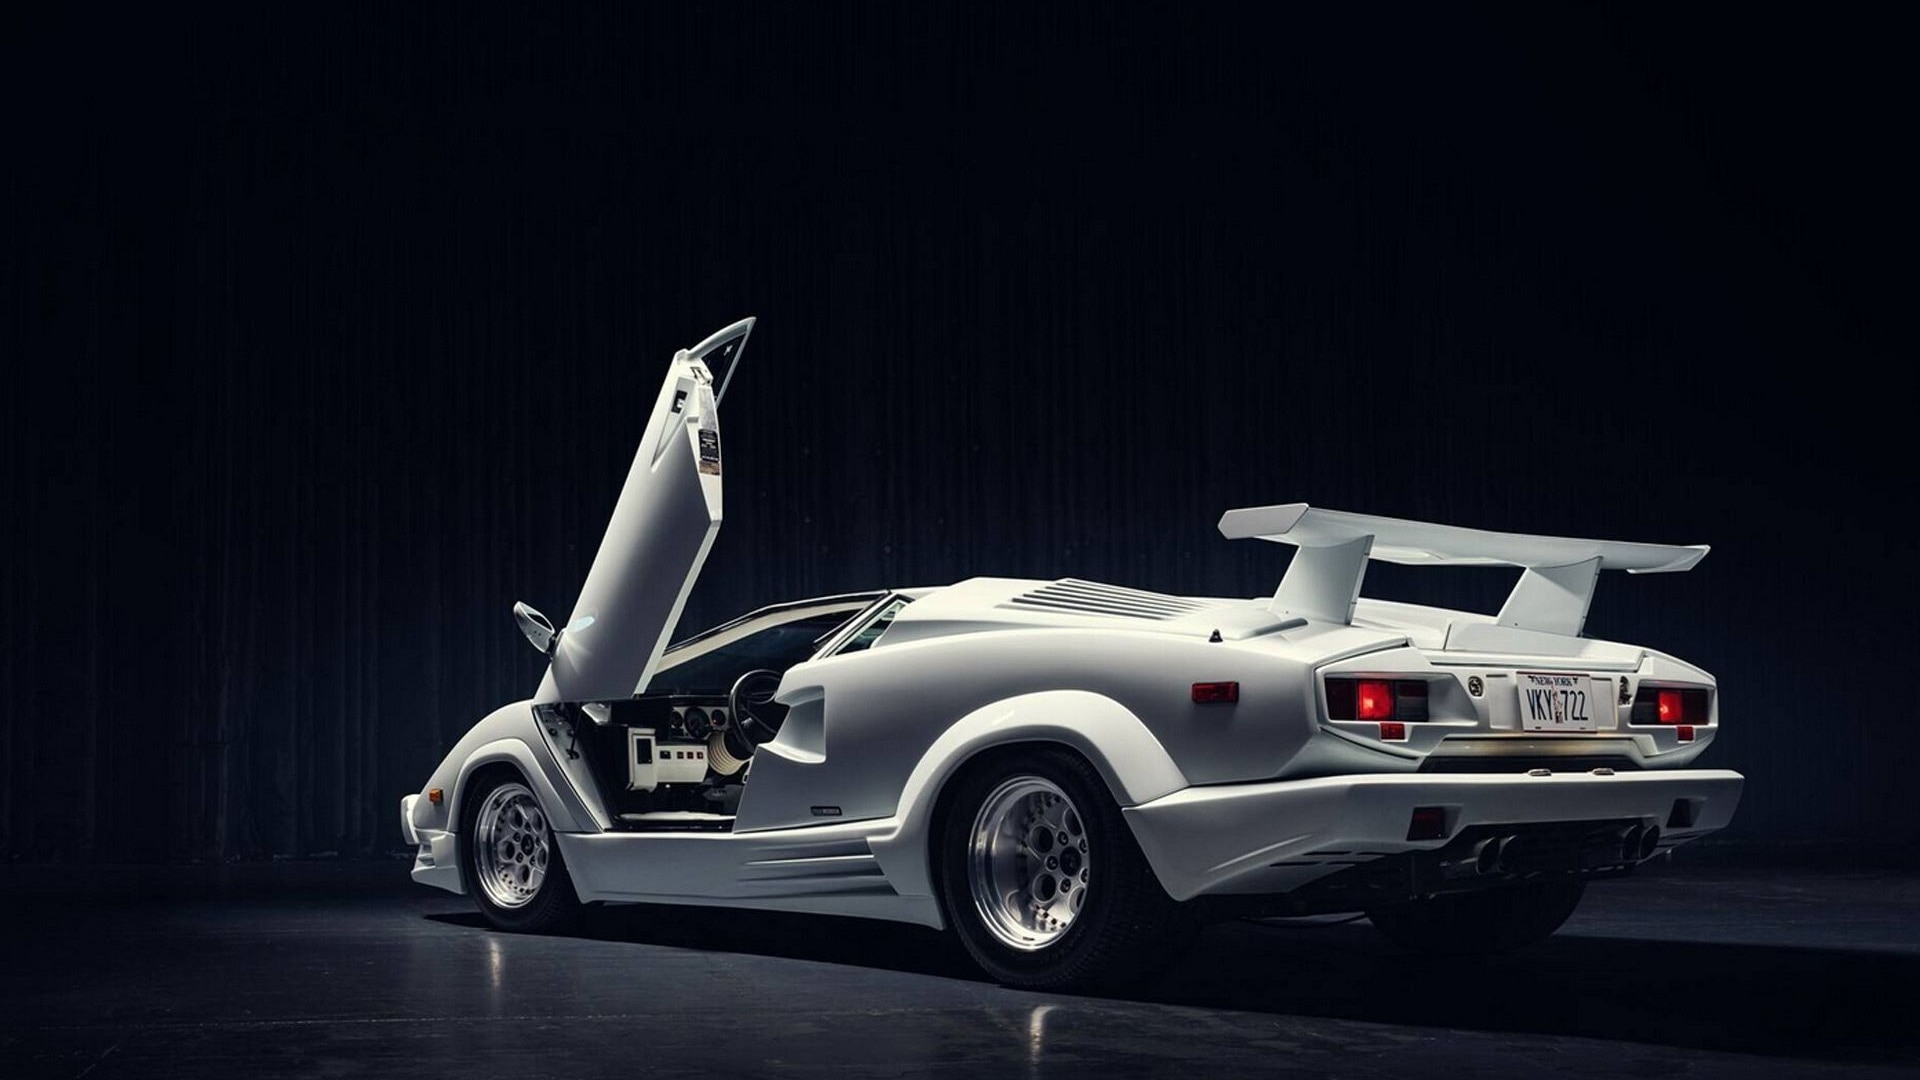 Lamborghini Countach that starred in “The Wolf of Wall Street” - Photo credit: RM Sotheby's